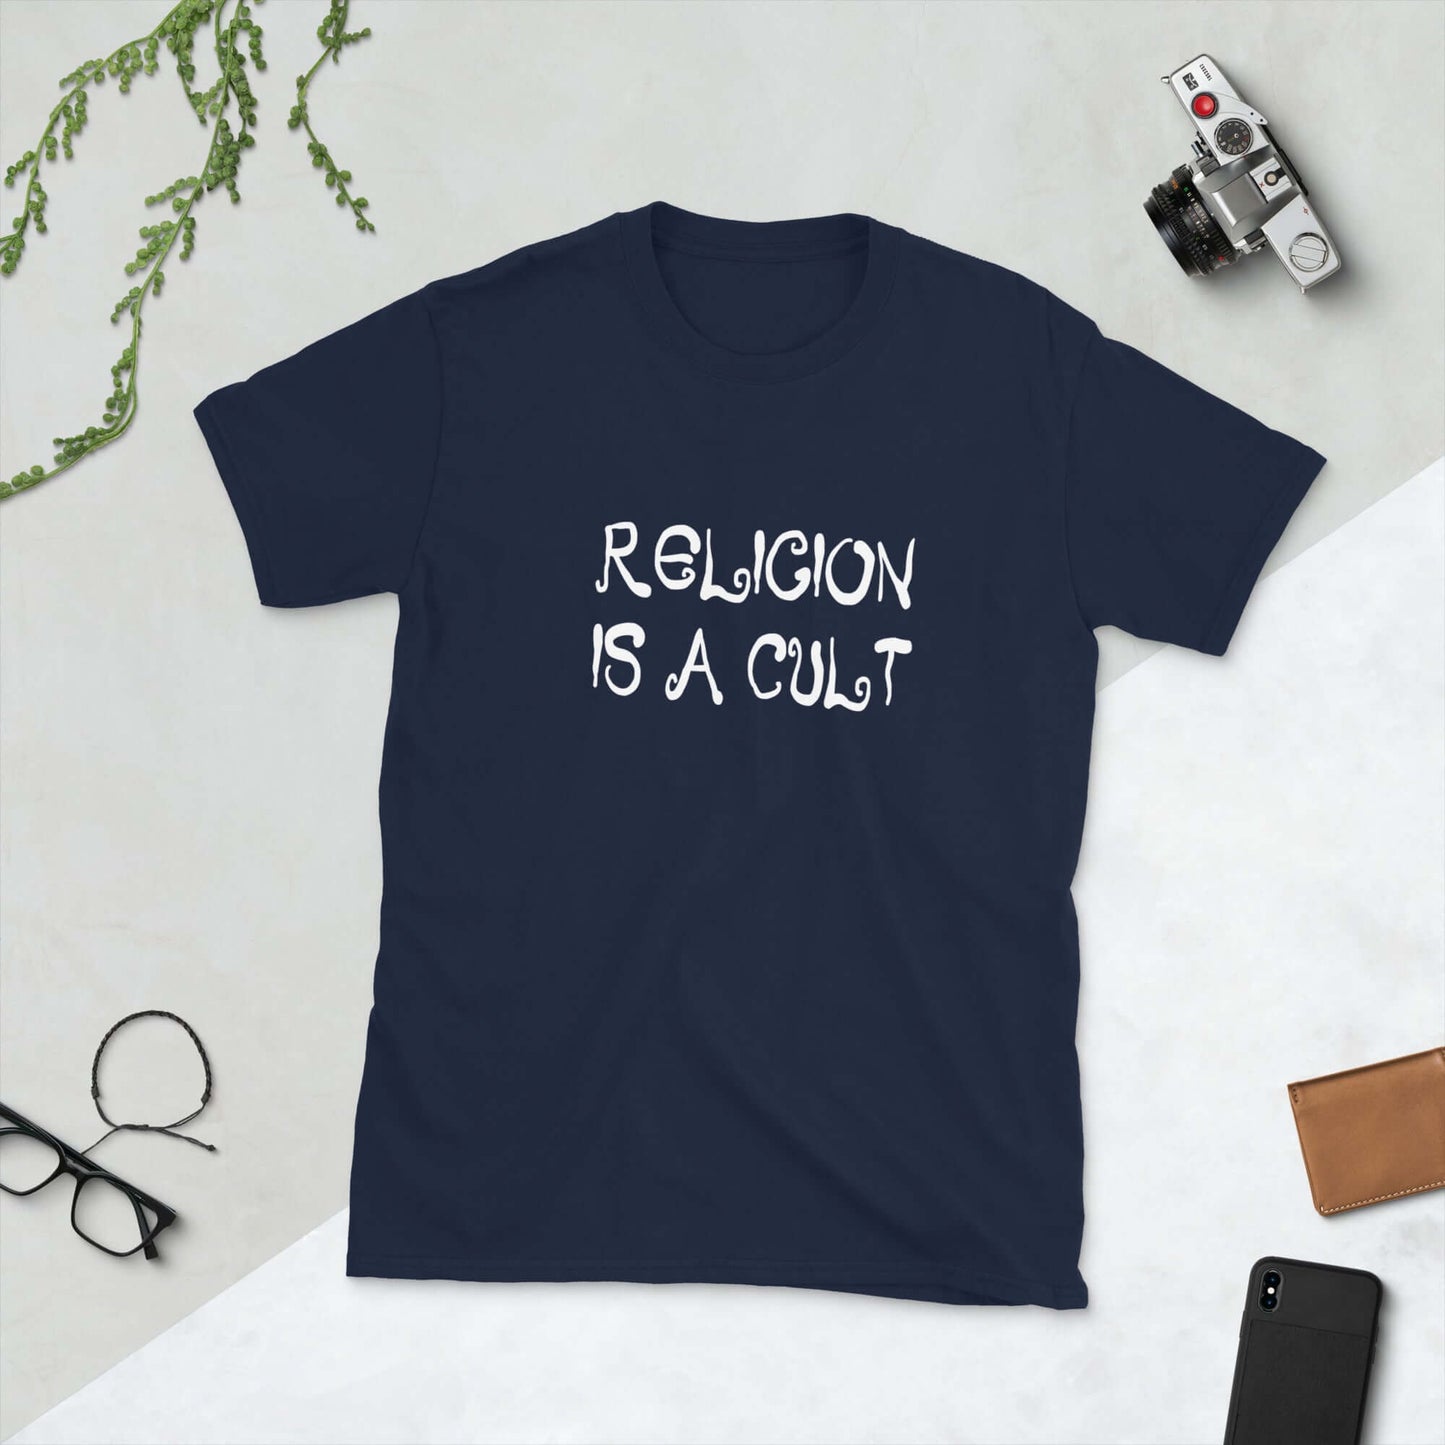 Religion is a cult t-shirt